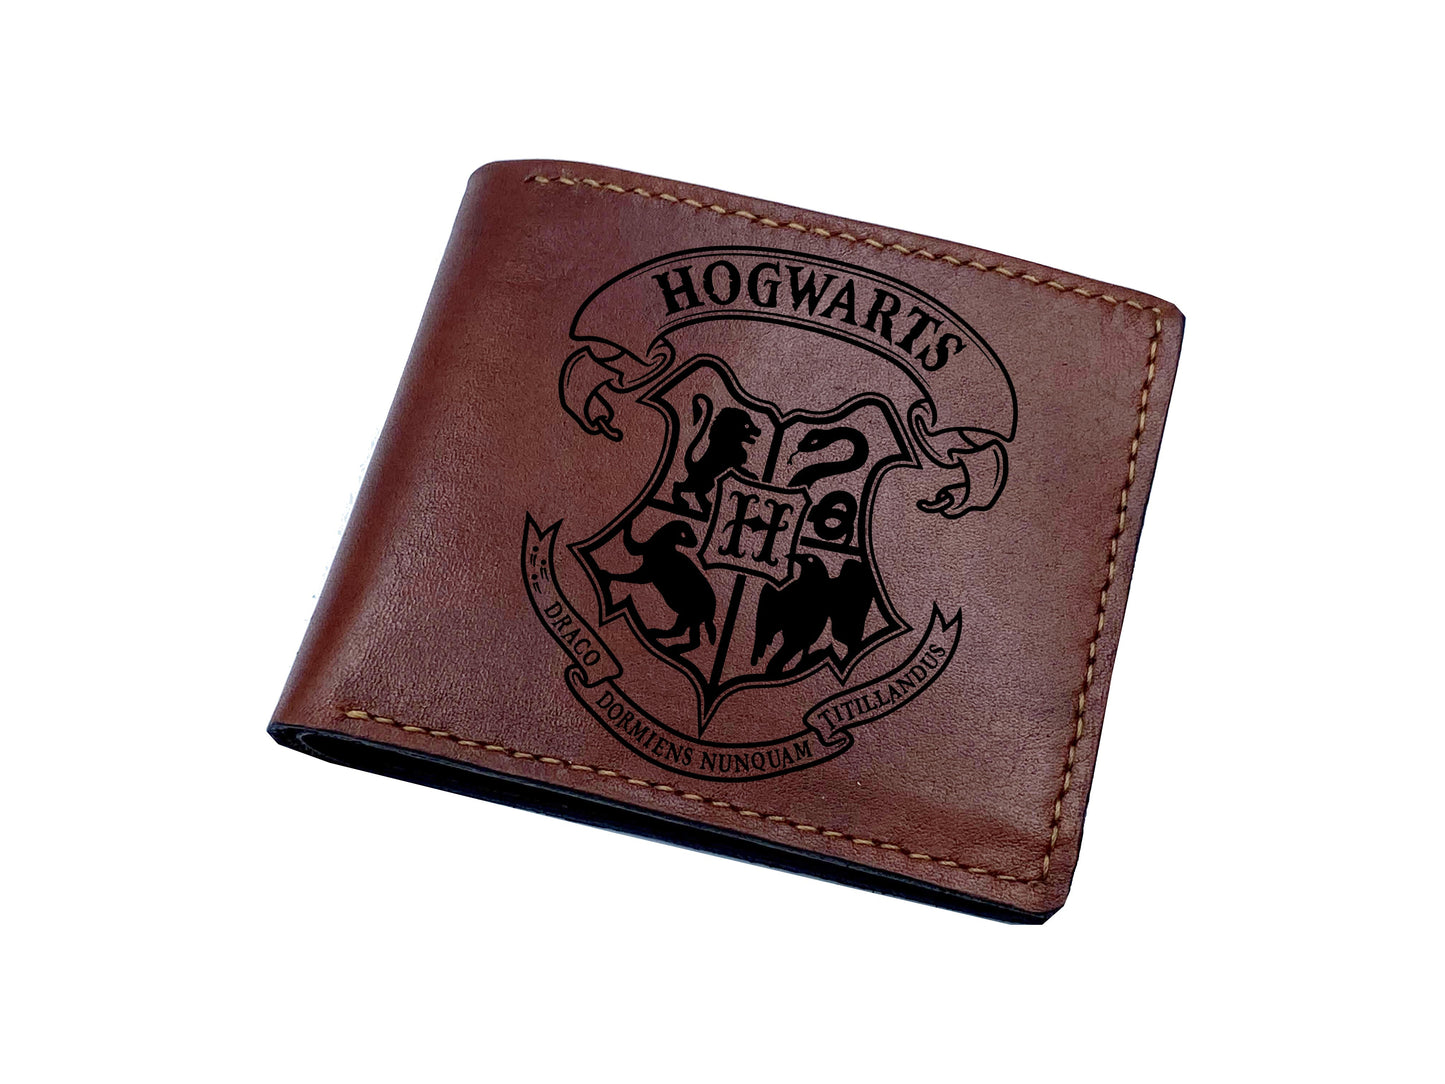 Mayan Corner - Personalized leather gift for men, Hogwarts school logo engraving leather wallet, bifold leather wallet